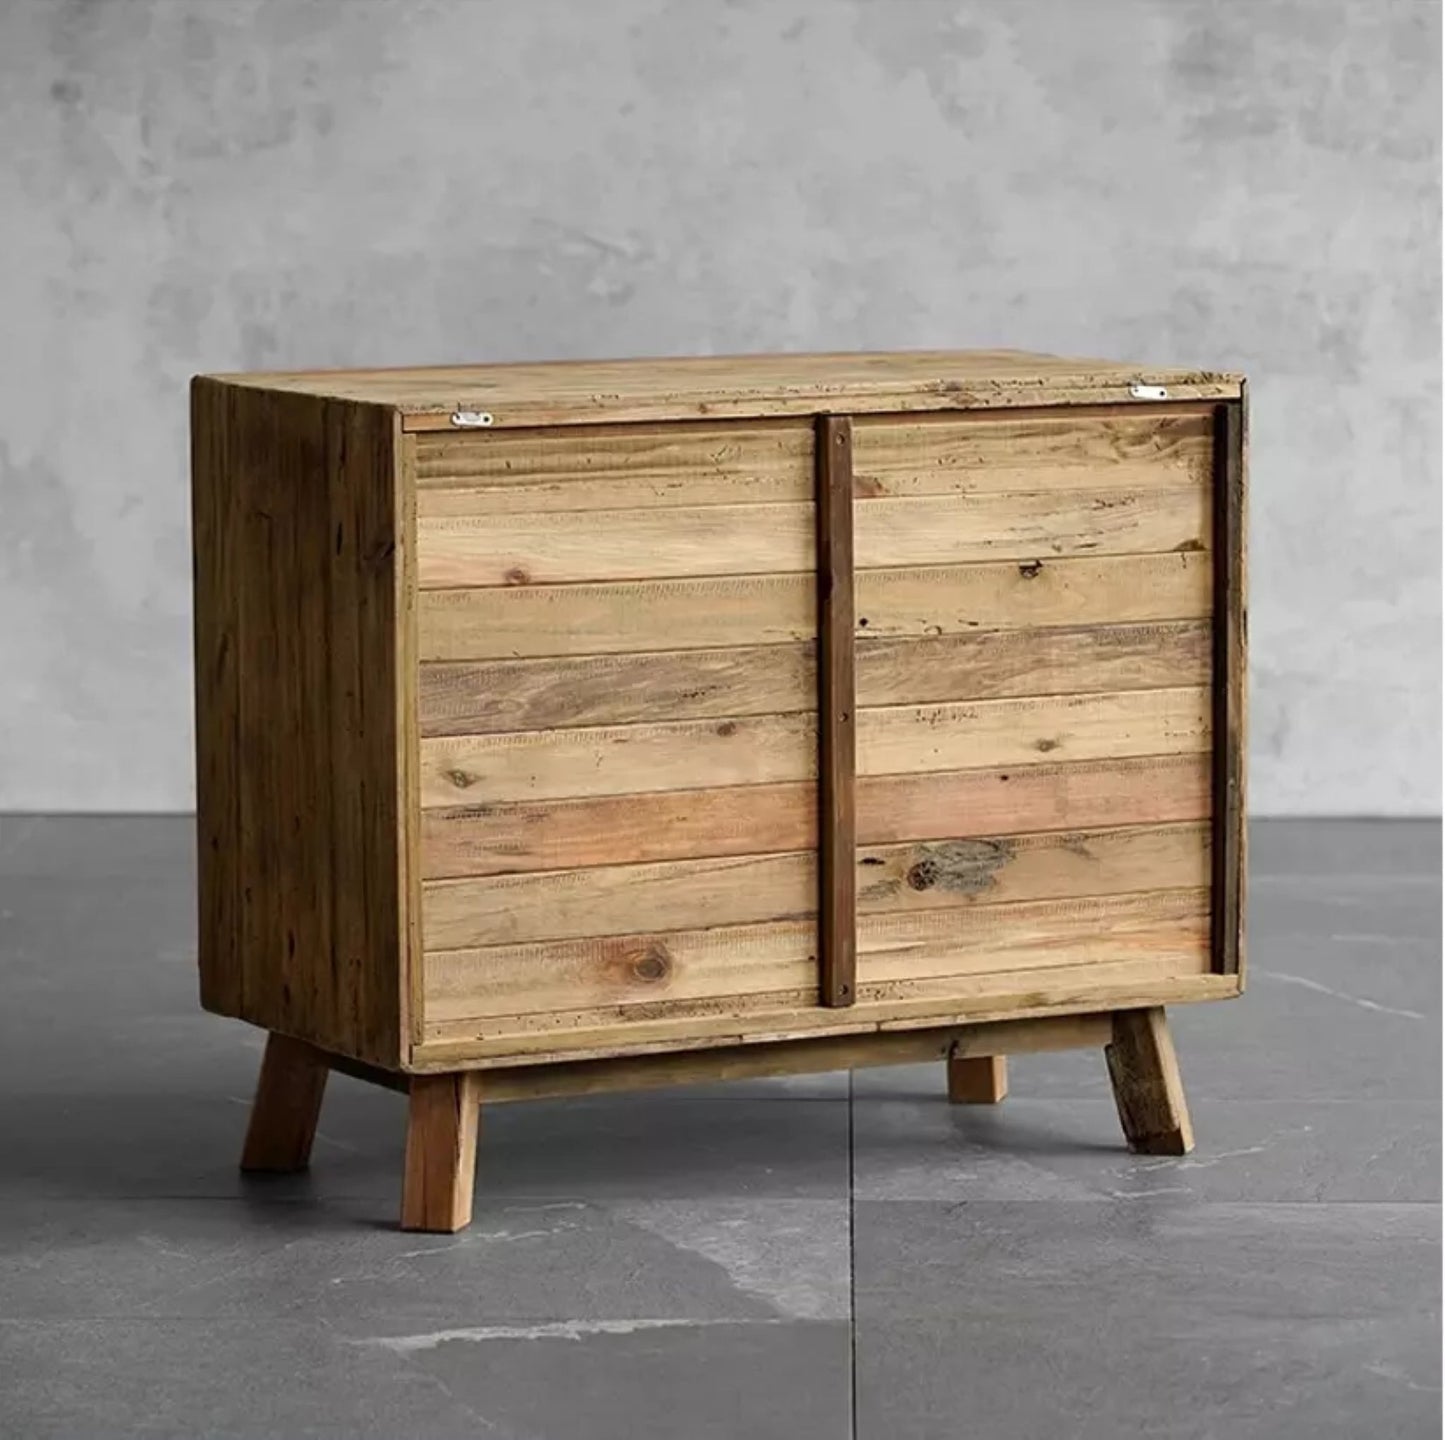 30% Off, Reclaimed Wooden Storage Cabinet With Drawers